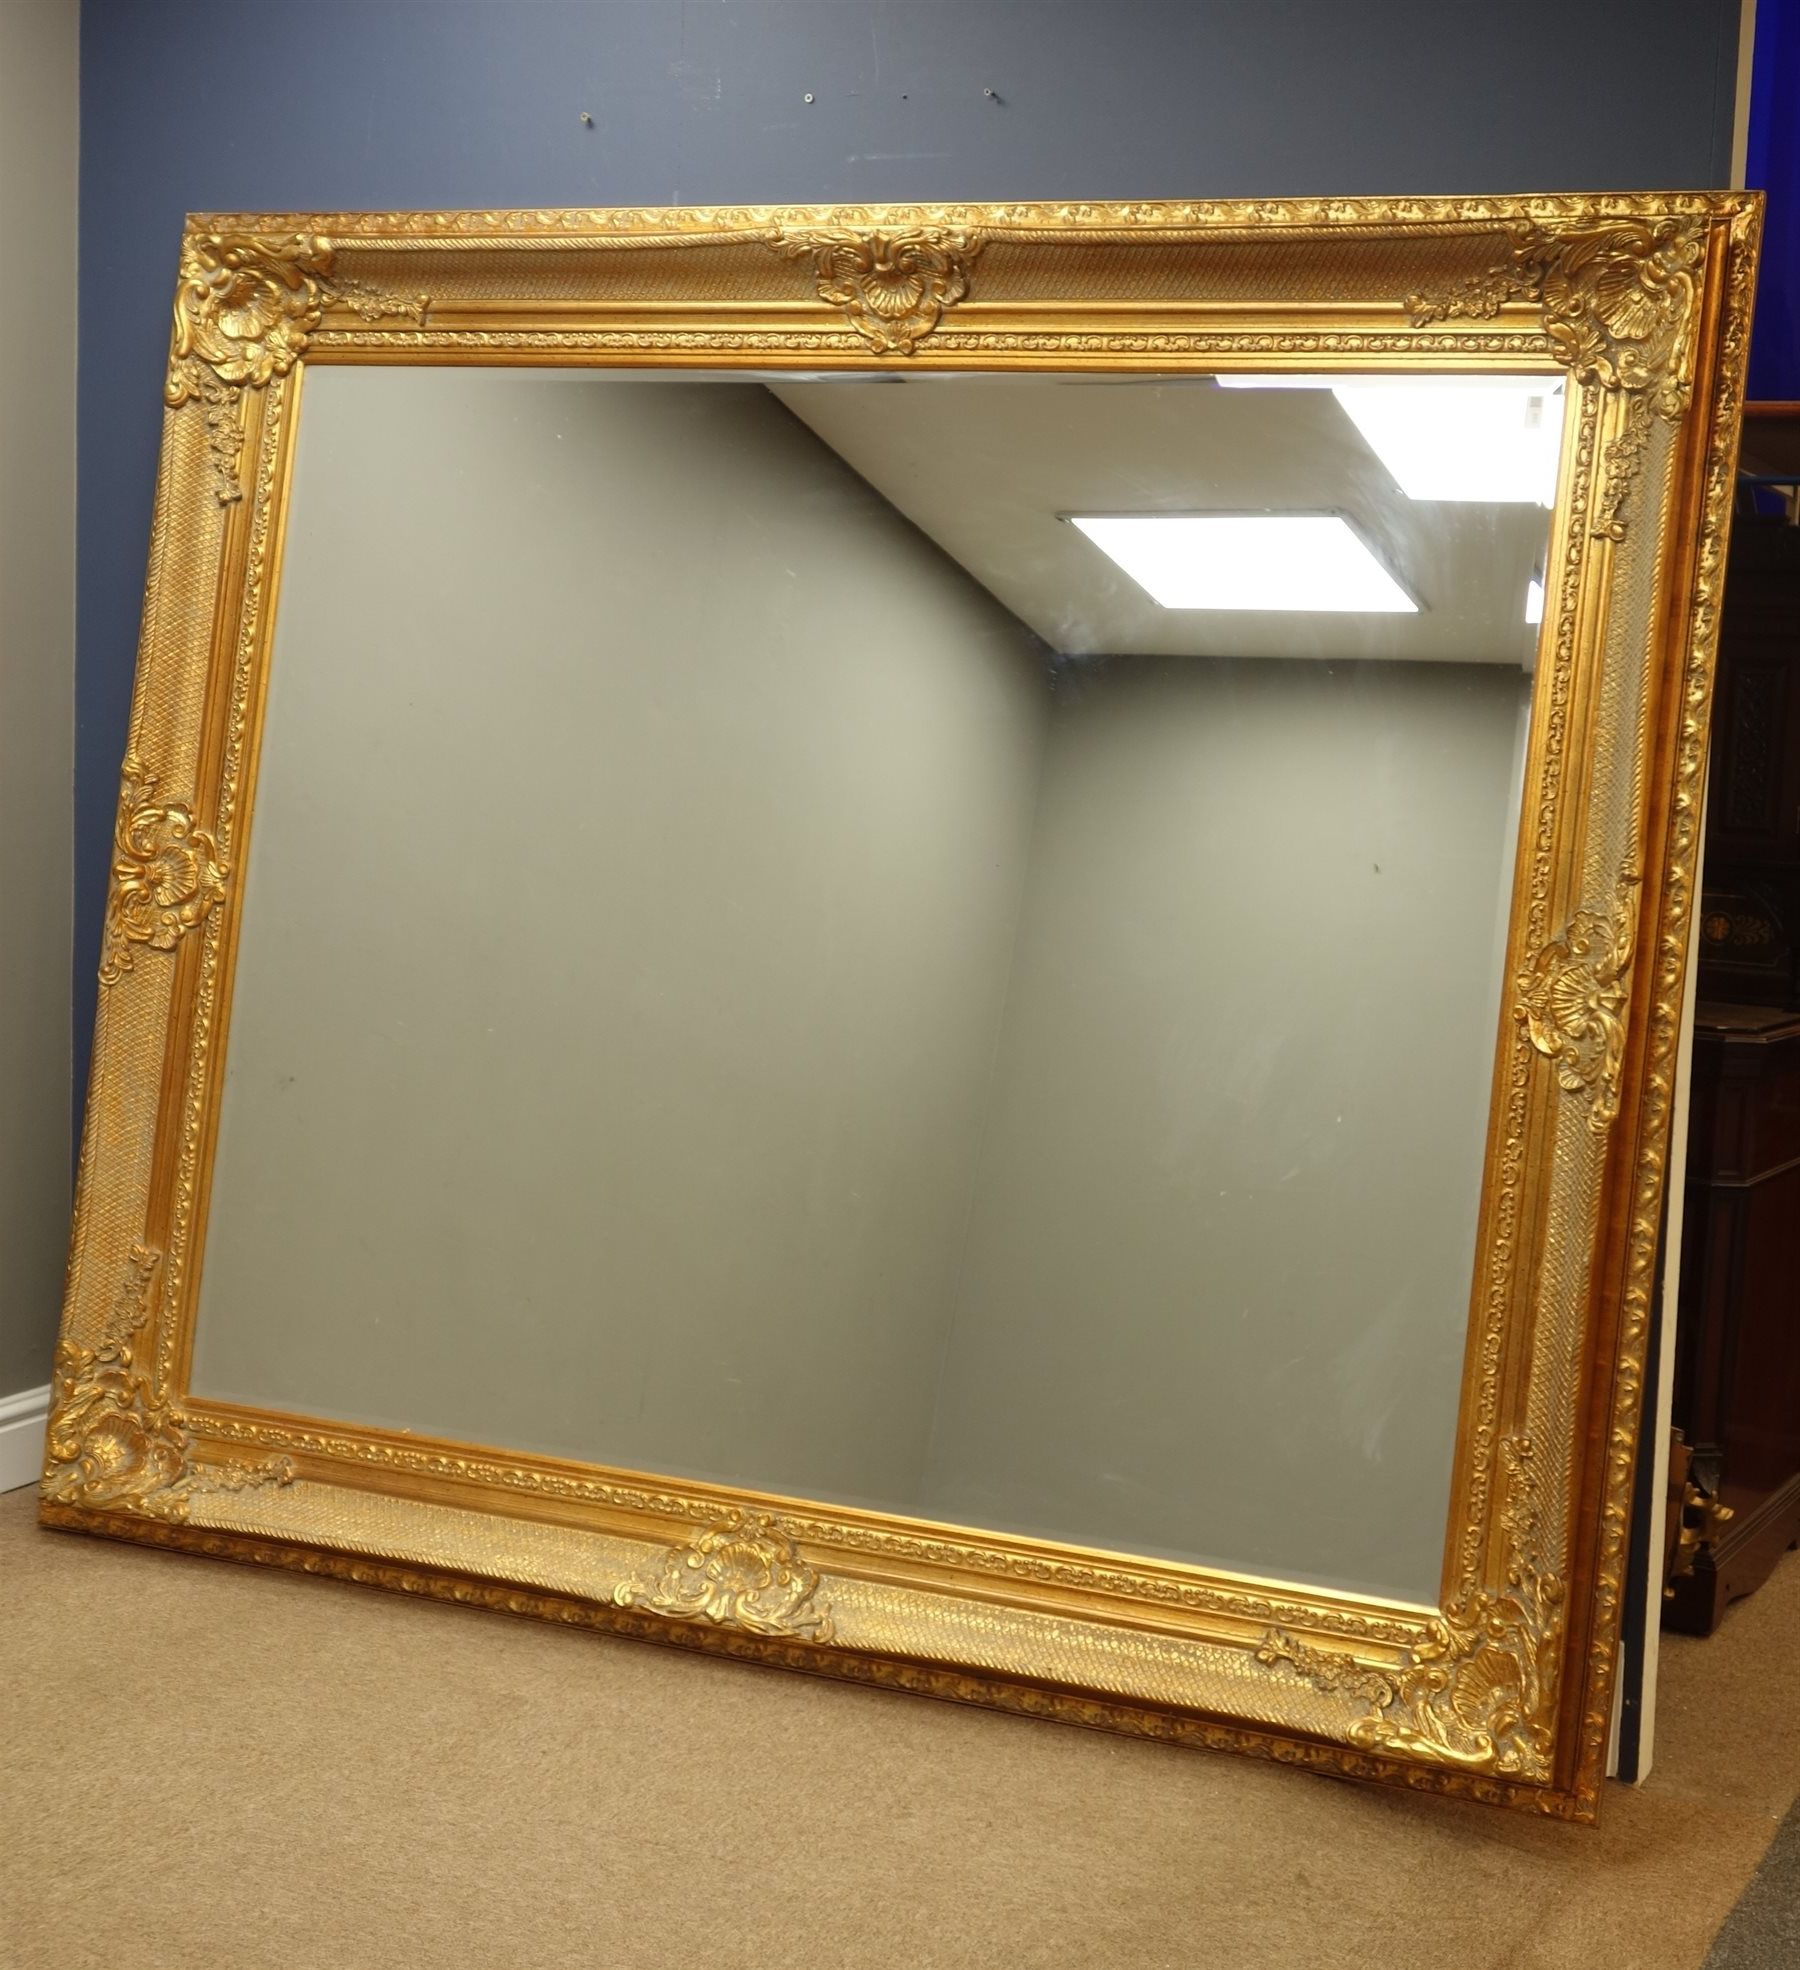 Edged Wall Mirrors Throughout Widely Used Large Rectangular Bevelled Edge Wall Mirror In Ornate Swept Gilt Frame (View 3 of 15)